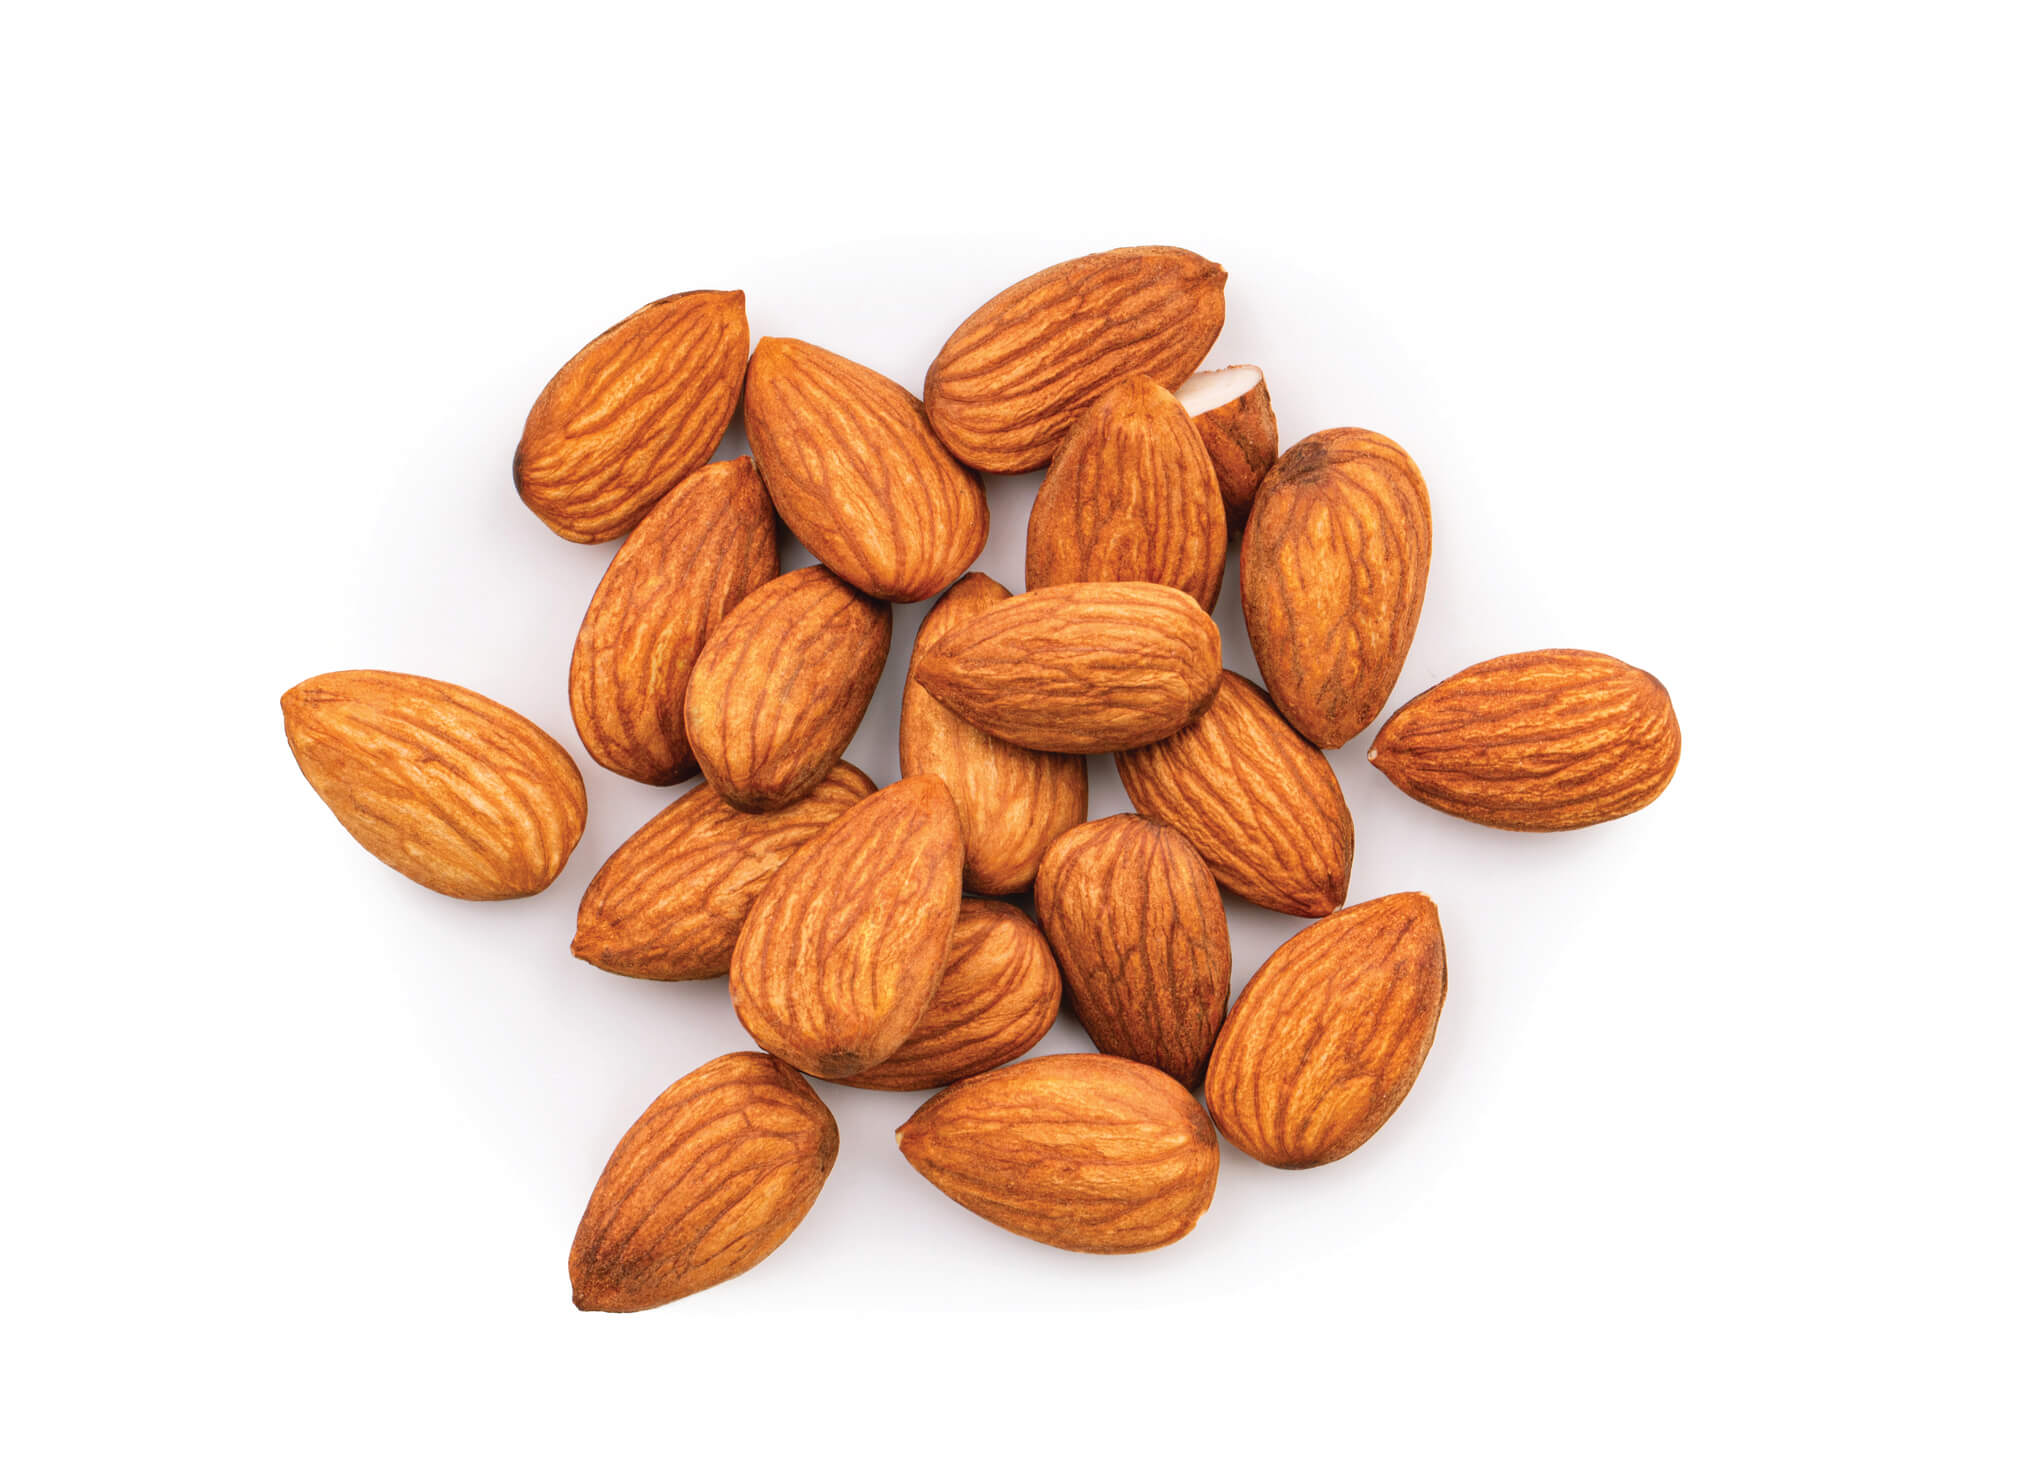 Almonds - energy boosting foods